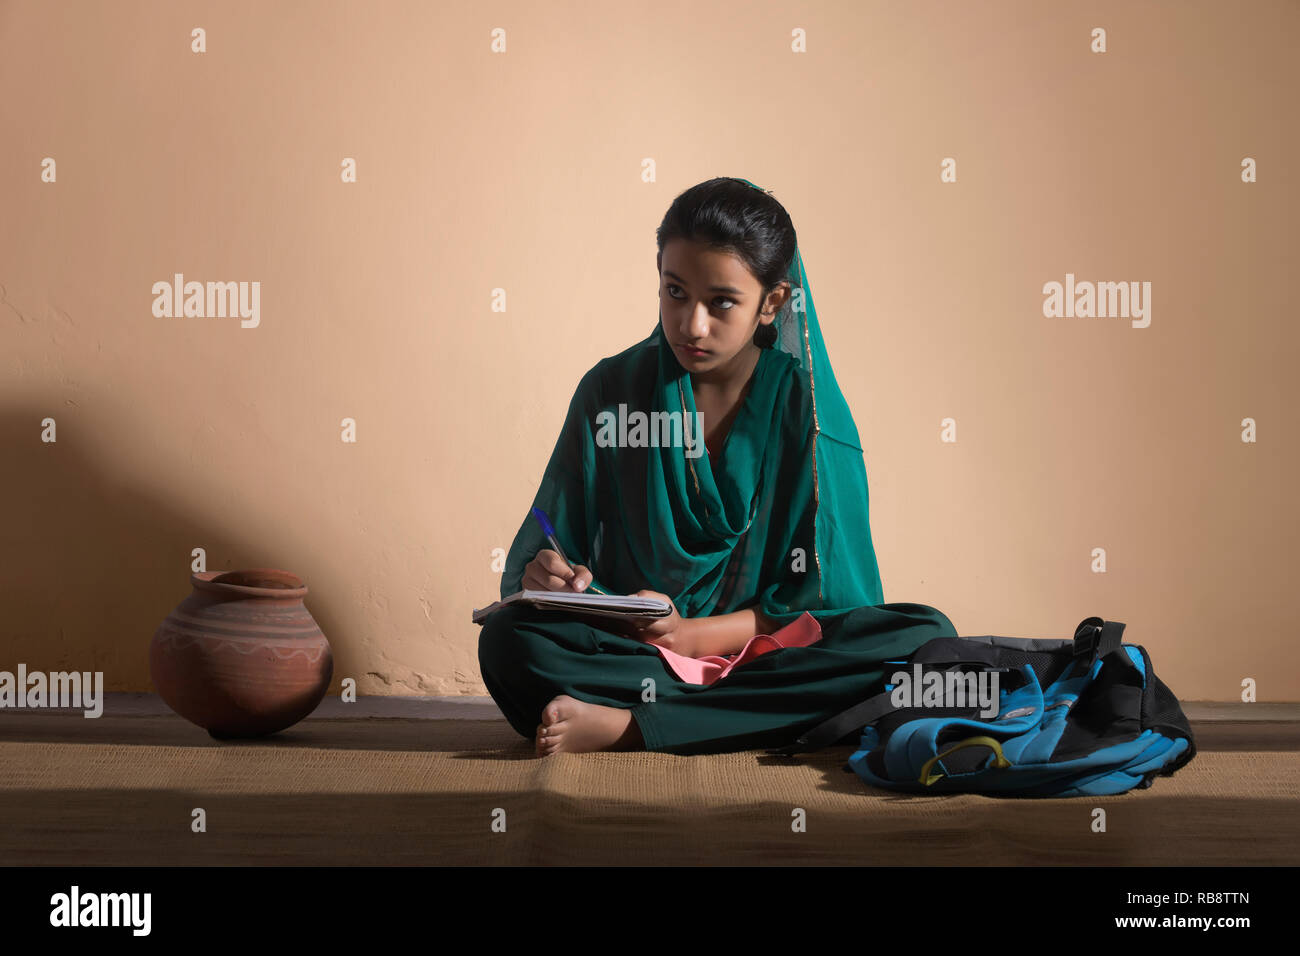 Rural girl in traditional clothing sitting on floor and studying Stock Photo